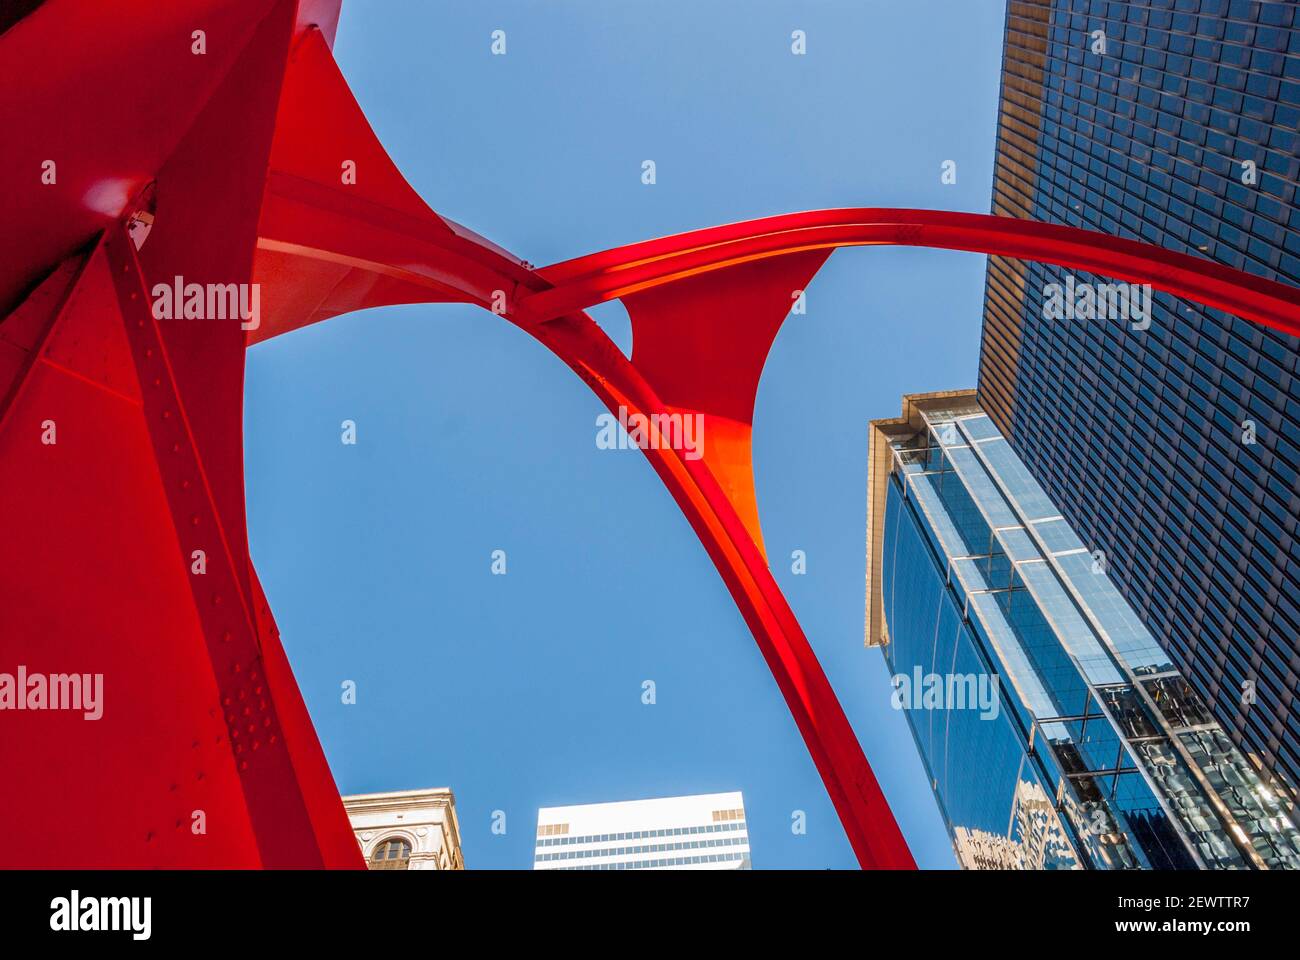 Looking up at Calder's Flamingo or stabile, was unveiled to the public in 1974.it is situated at 50 W Adams St, Chicago, IL 60610 Stock Photo